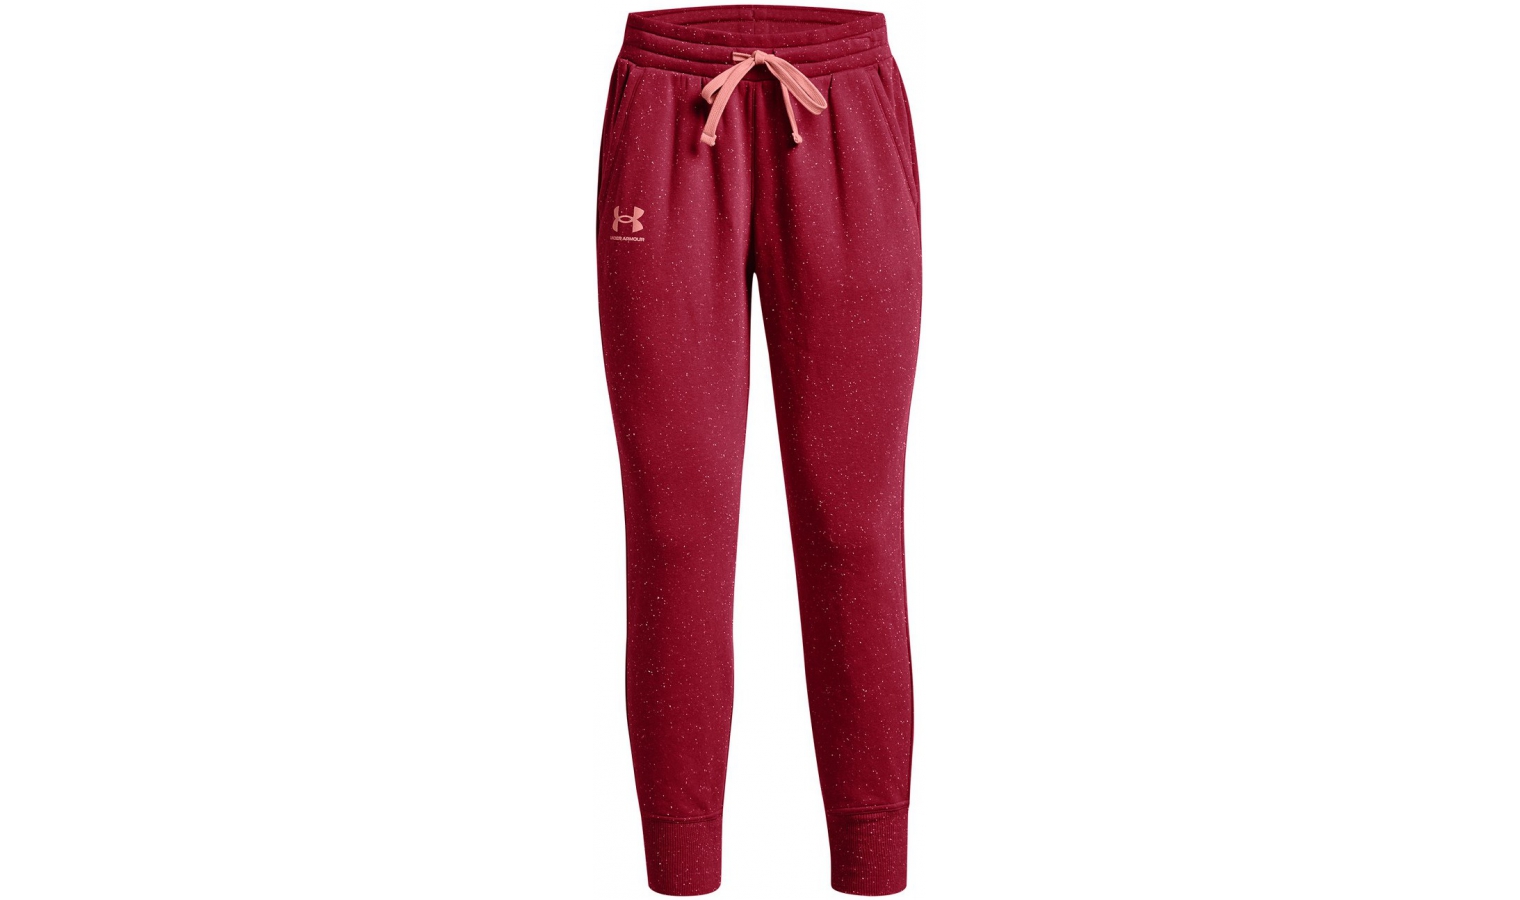 Womens sports pants Under Armour RIVAL FLEECE JOGGERS W pink